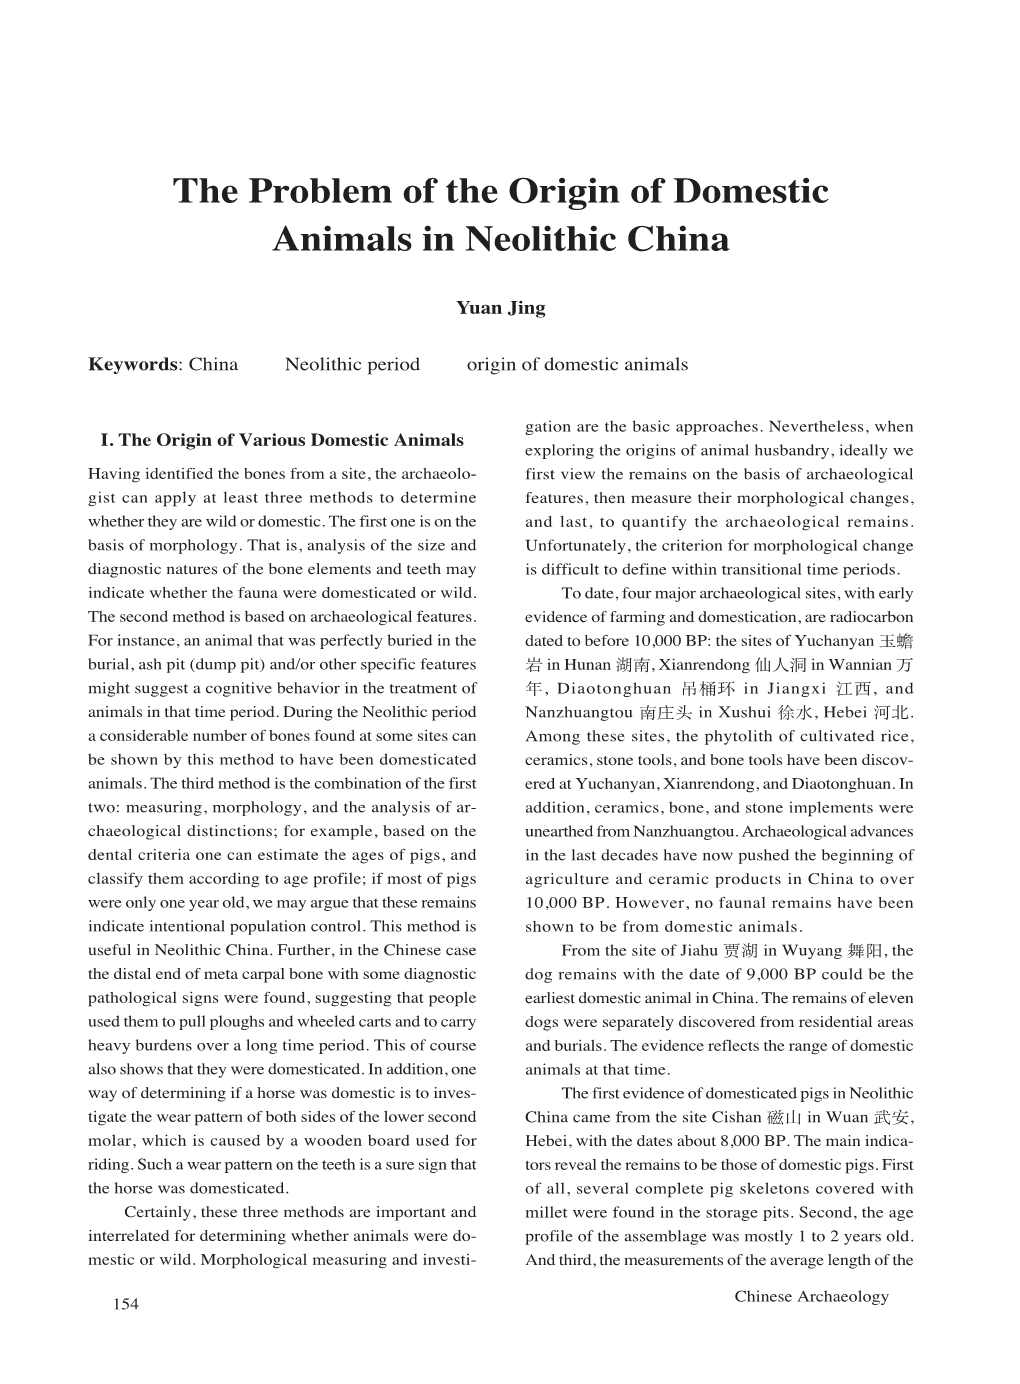 The Problem of the Origin of Domestic Animals in Neolithic China